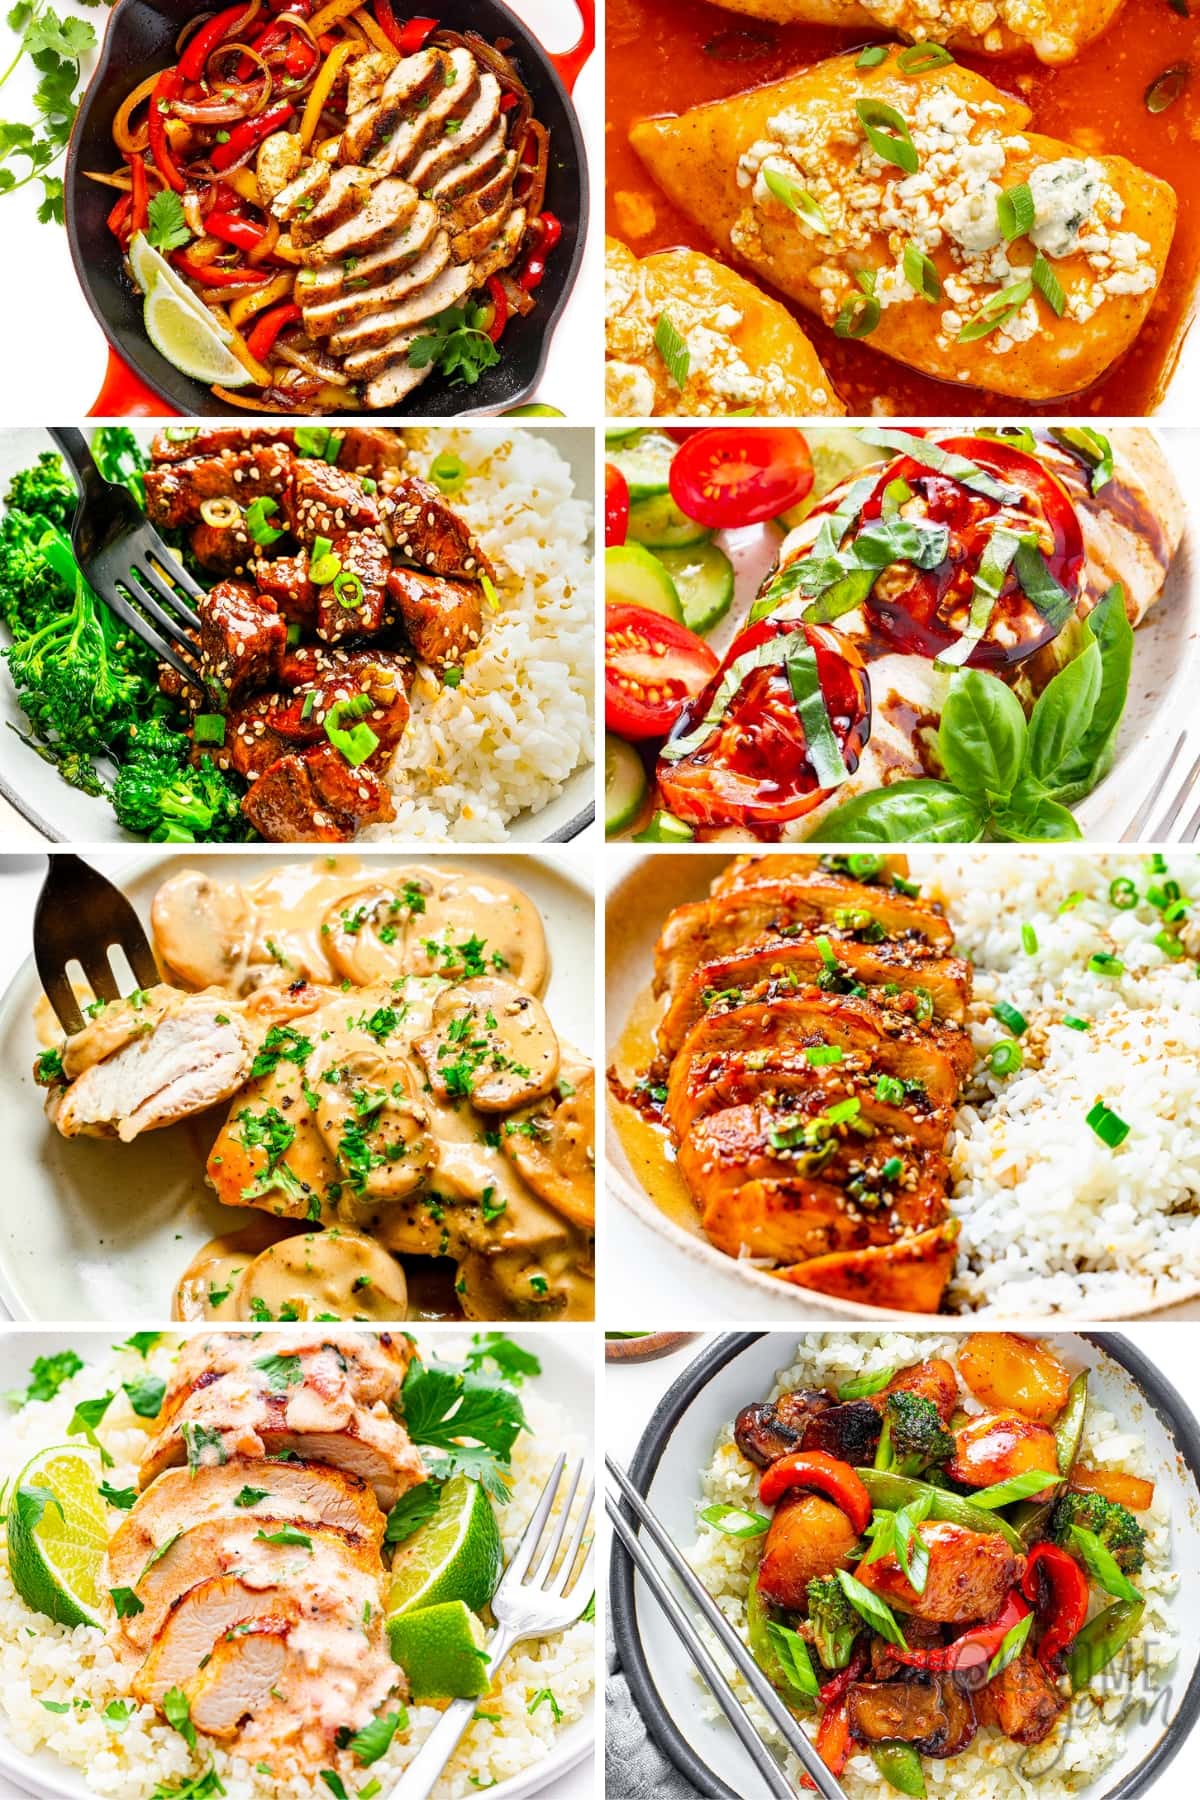 Chicken meal prep ideas collage - different meal combos.